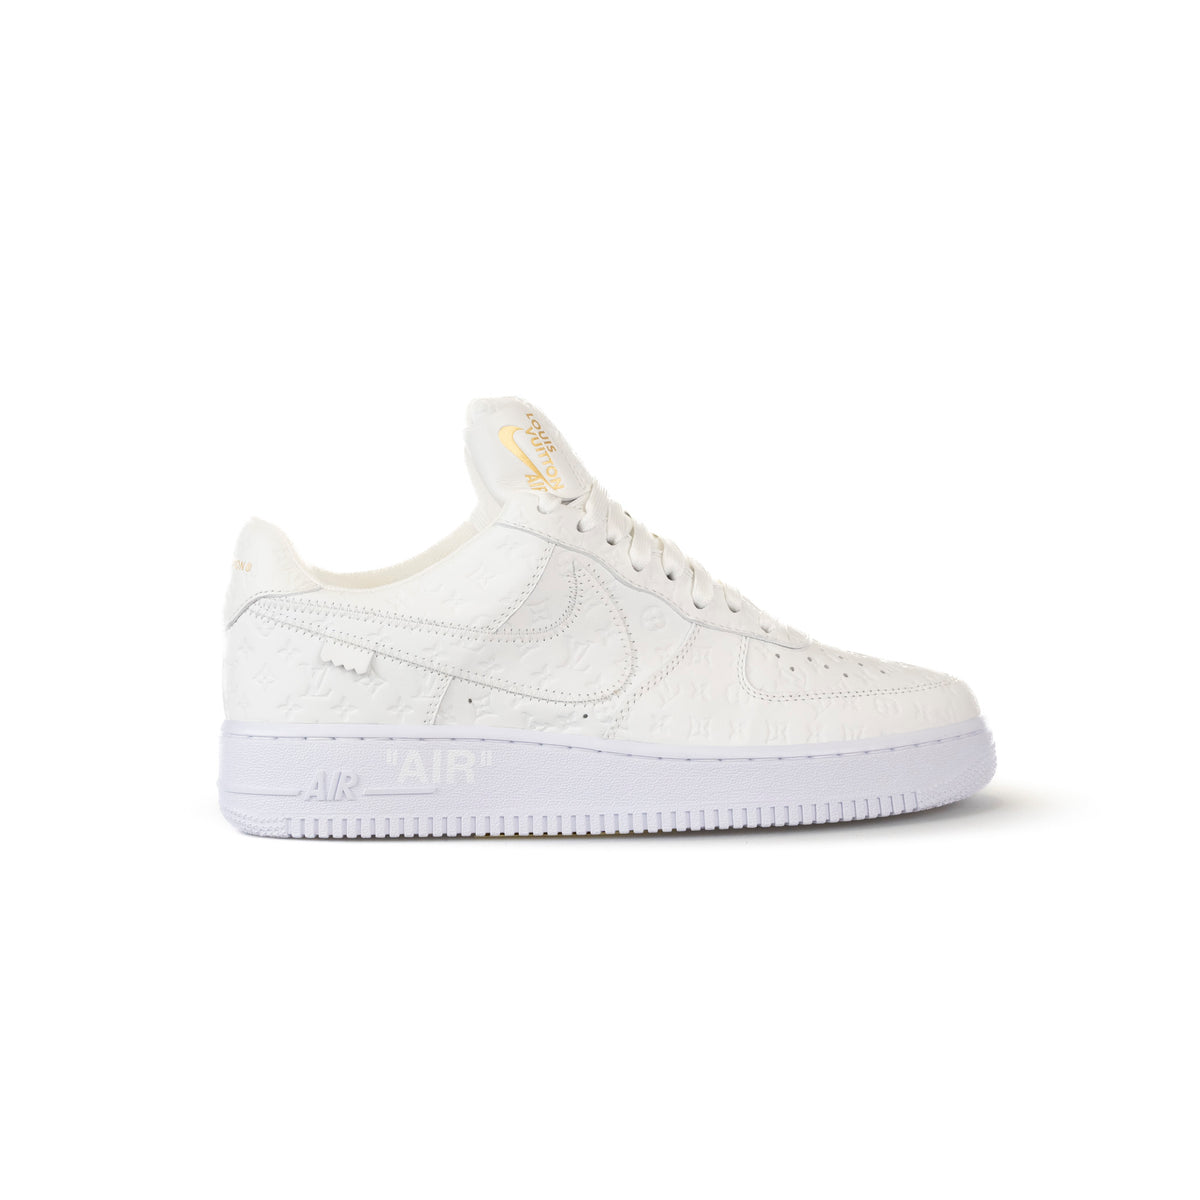 Louis Vuitton Nike Air Force 1 Low by Virgirl Abloh White